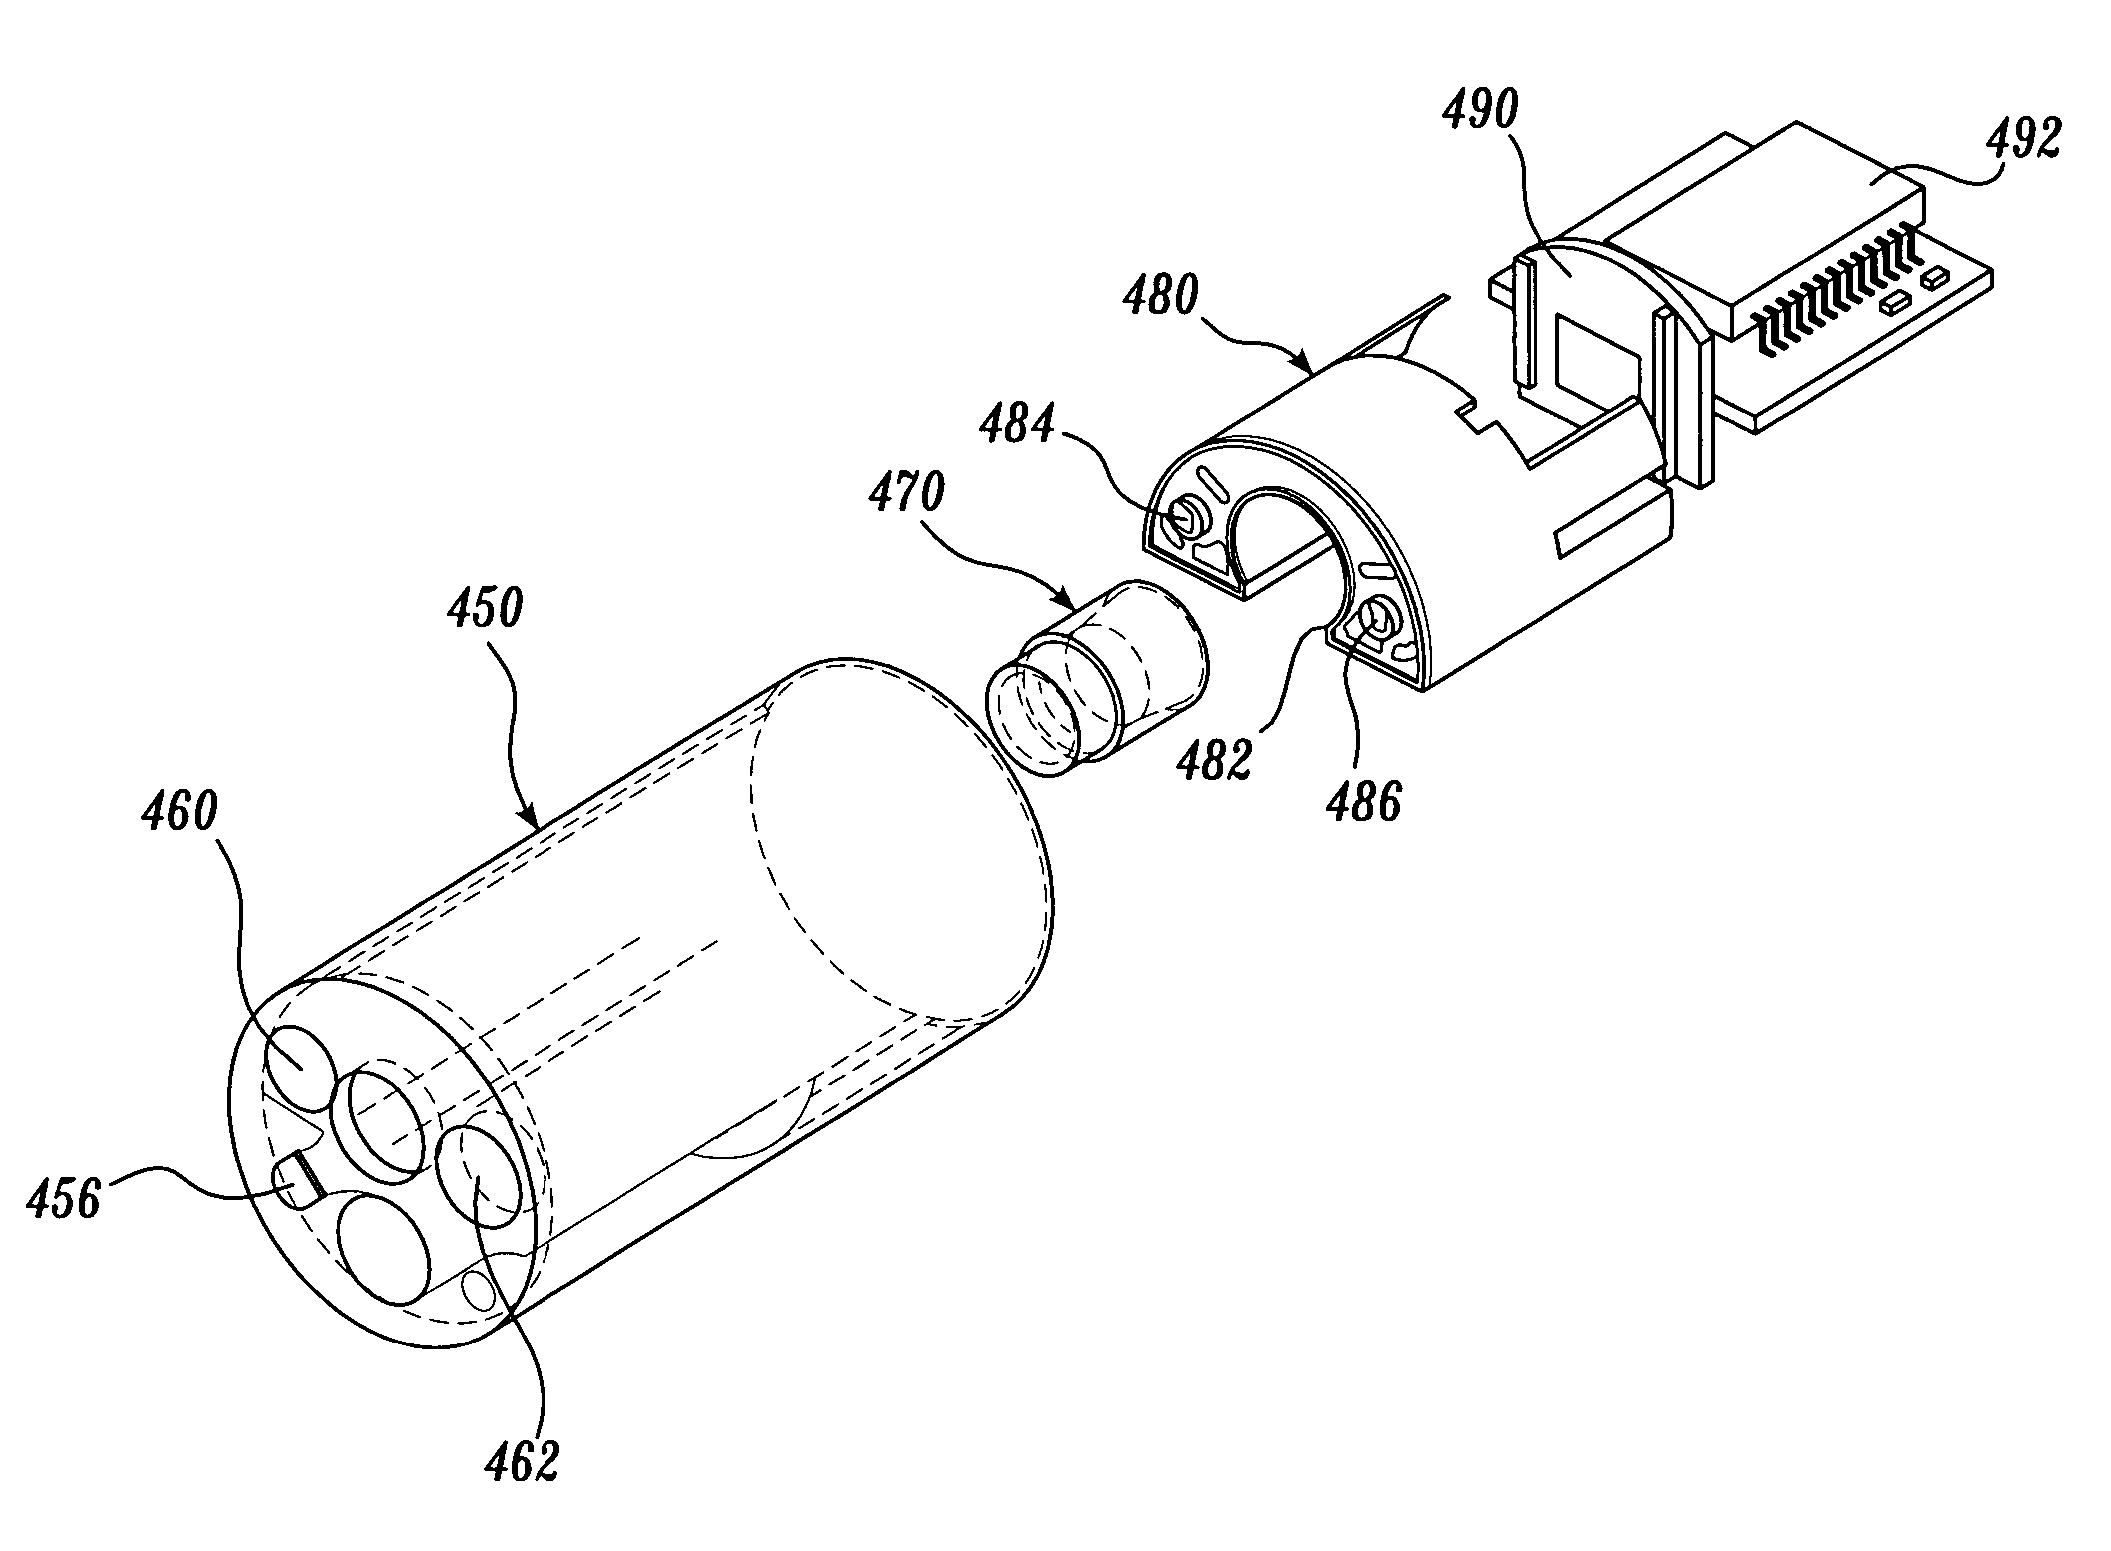 Endoscope with actively cooled illumination sources